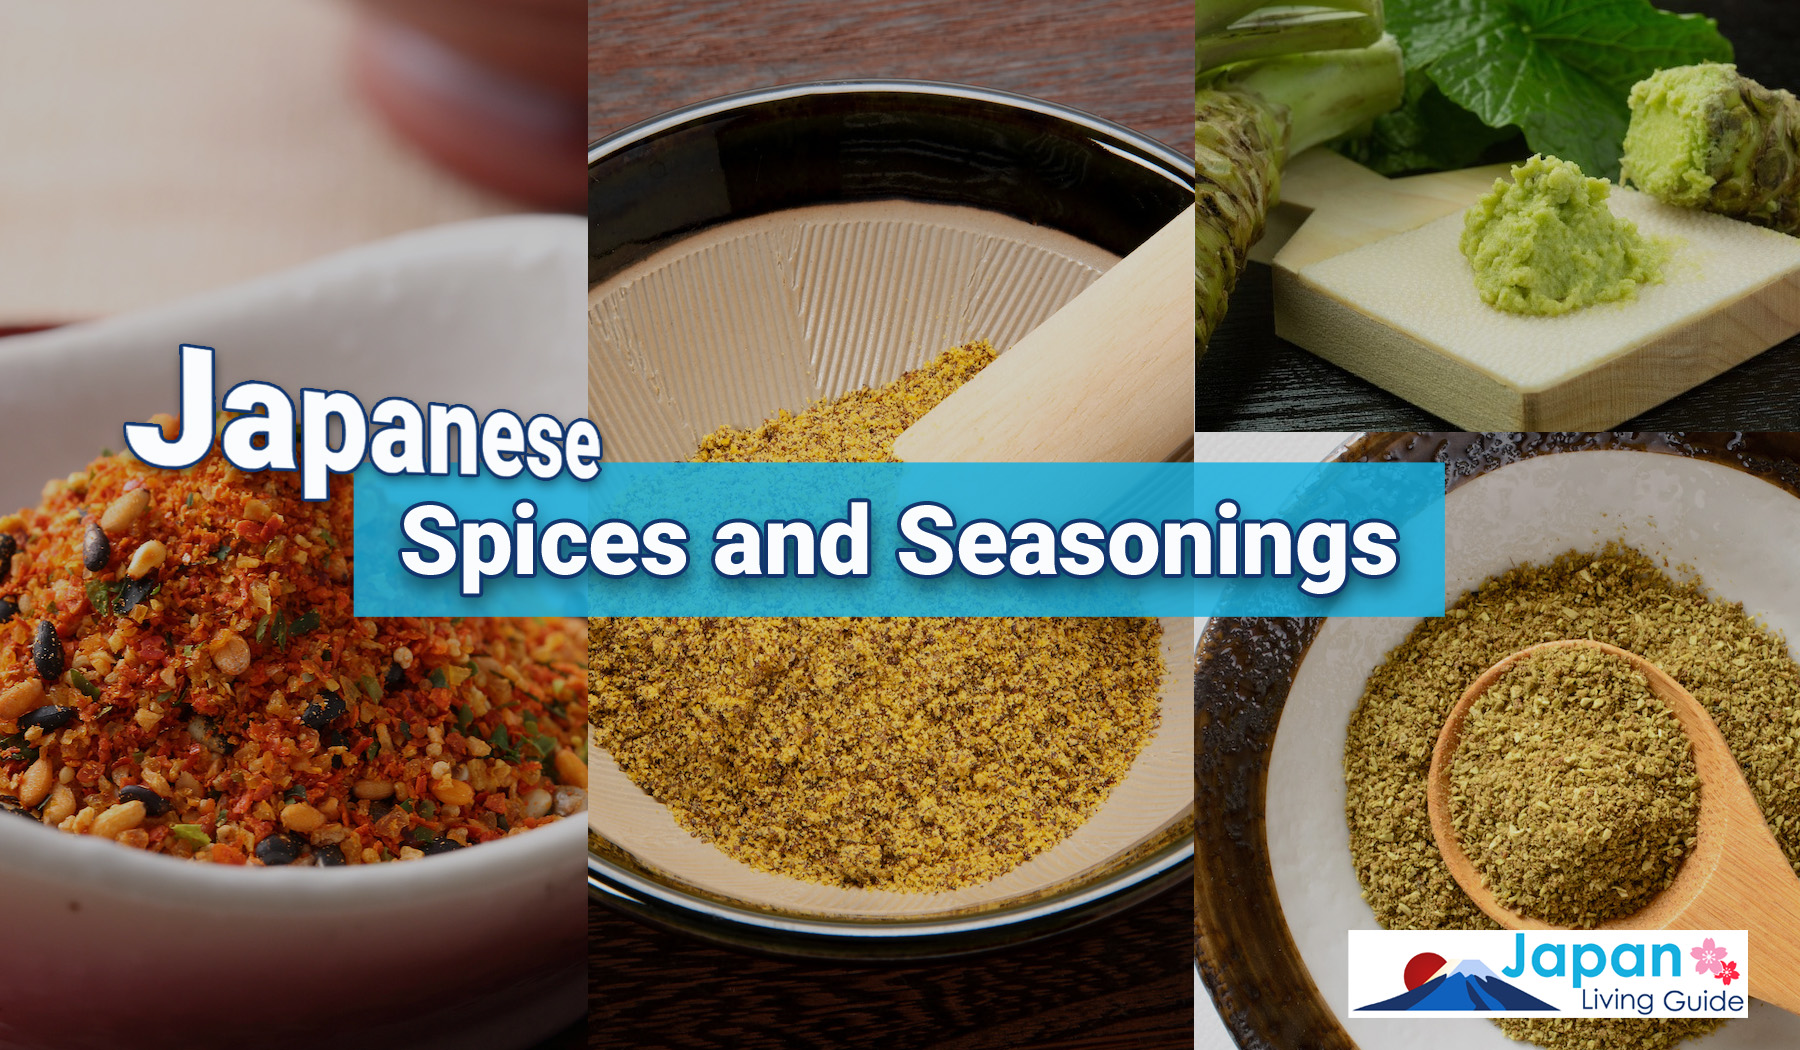 https://www.japanlivingguide.com/media/sifppw0a/japanese-spices-and-seasonings.jpg